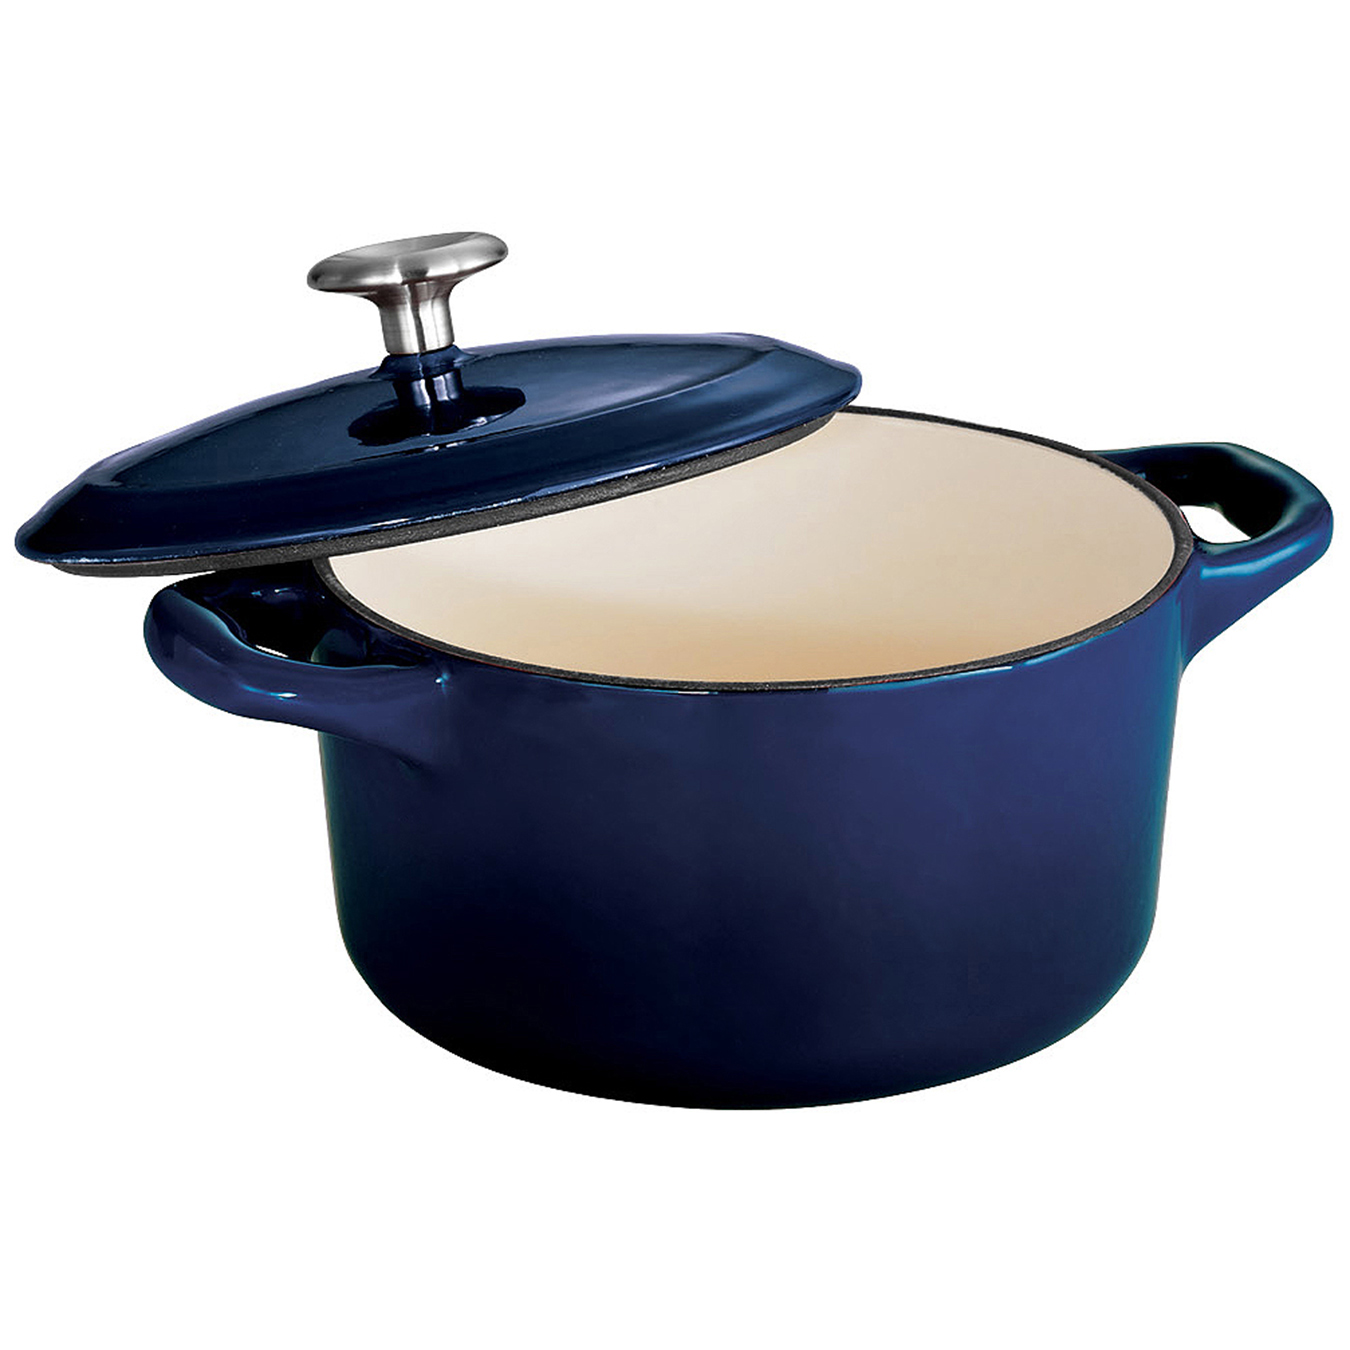 0016017077607 - TRAMONTINA GOURMET 10½-OUNCE ENAMELED CAST IRON COVERED MINI COCOTTE